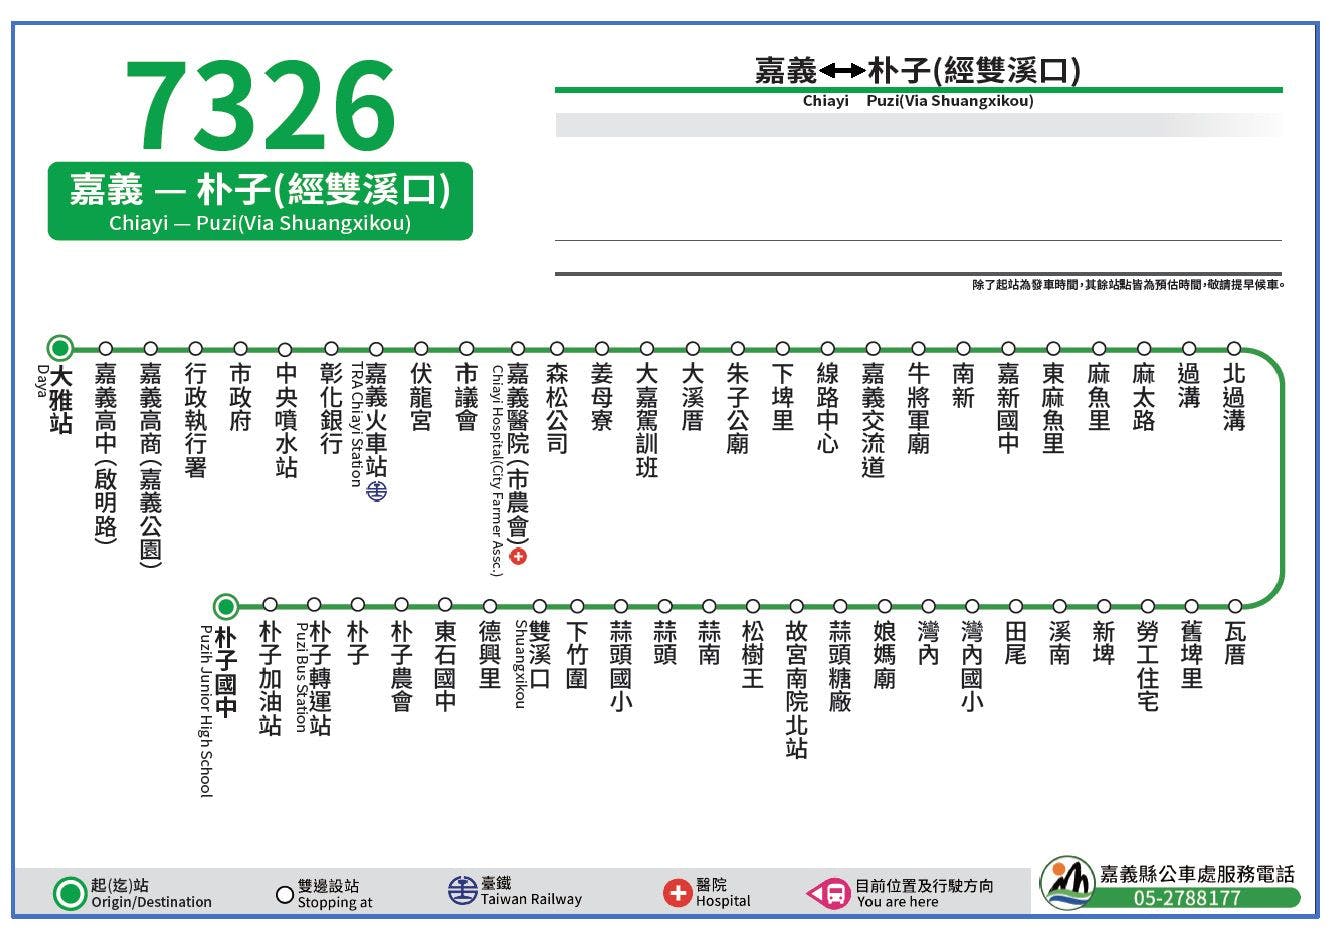 7326Route Map-Chiayi County Bus Service Administration